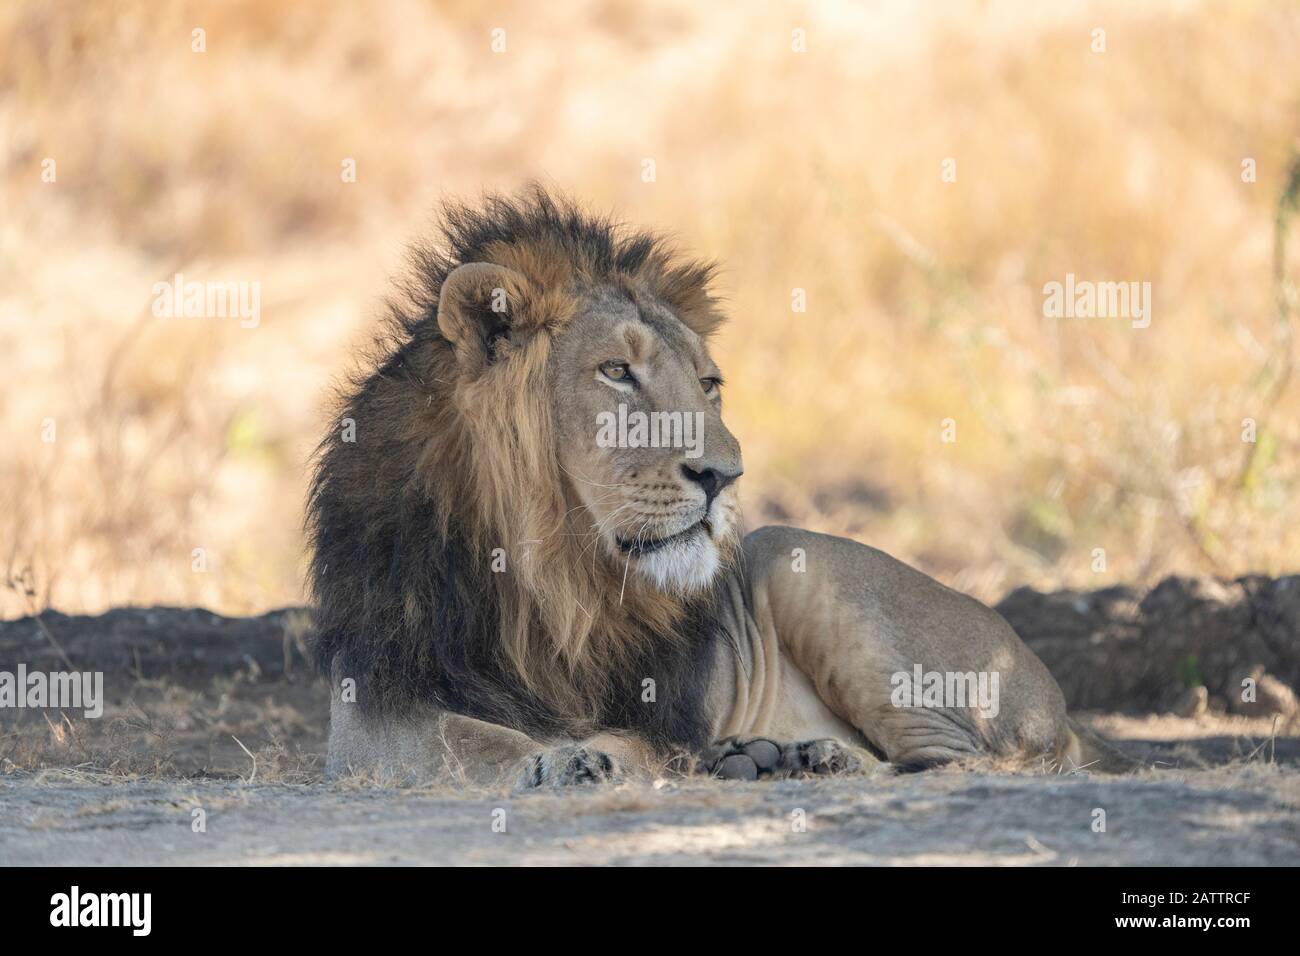 Asiatic Lion Male relaxing from Gir Sanctuary and National Park, Sasan, Gujarat, India Stock Photo